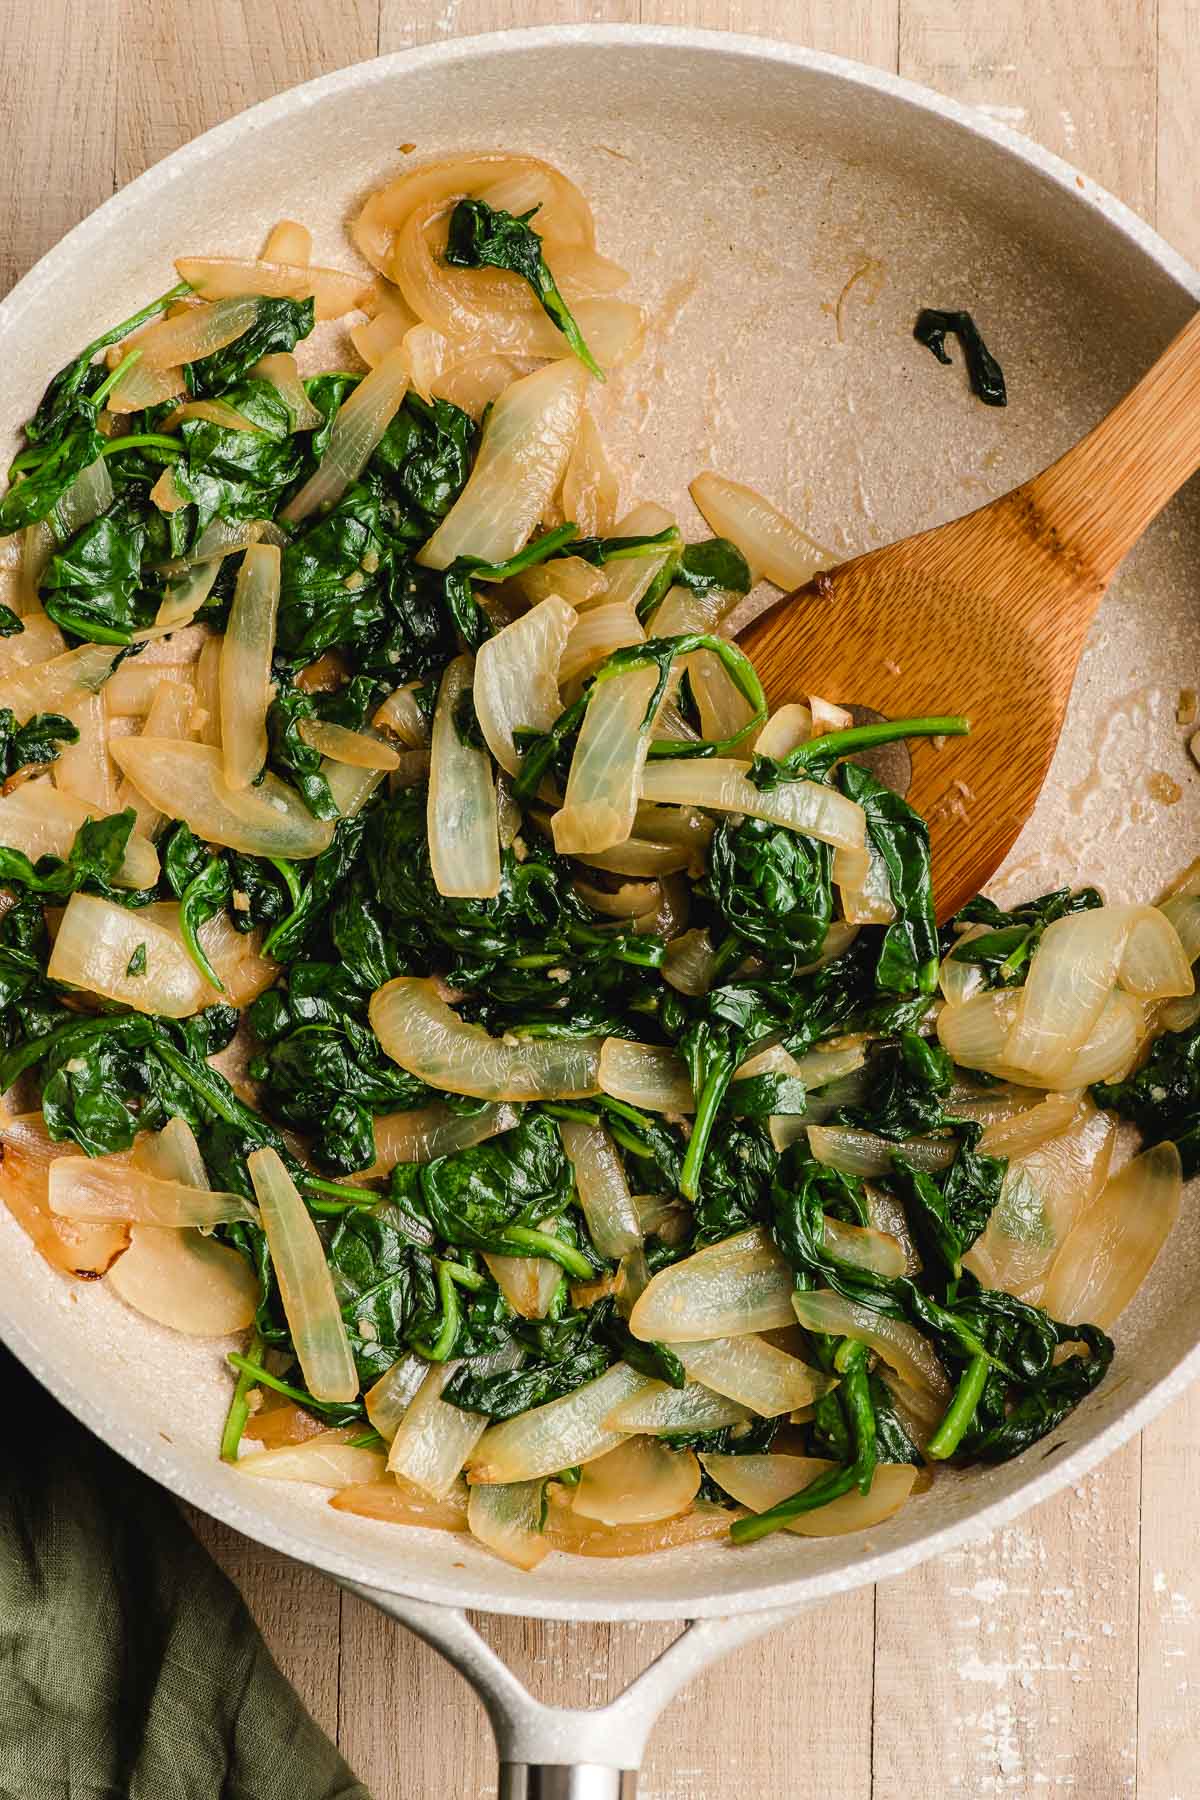 Speckled beige skillet with sauteed spinach and onions.